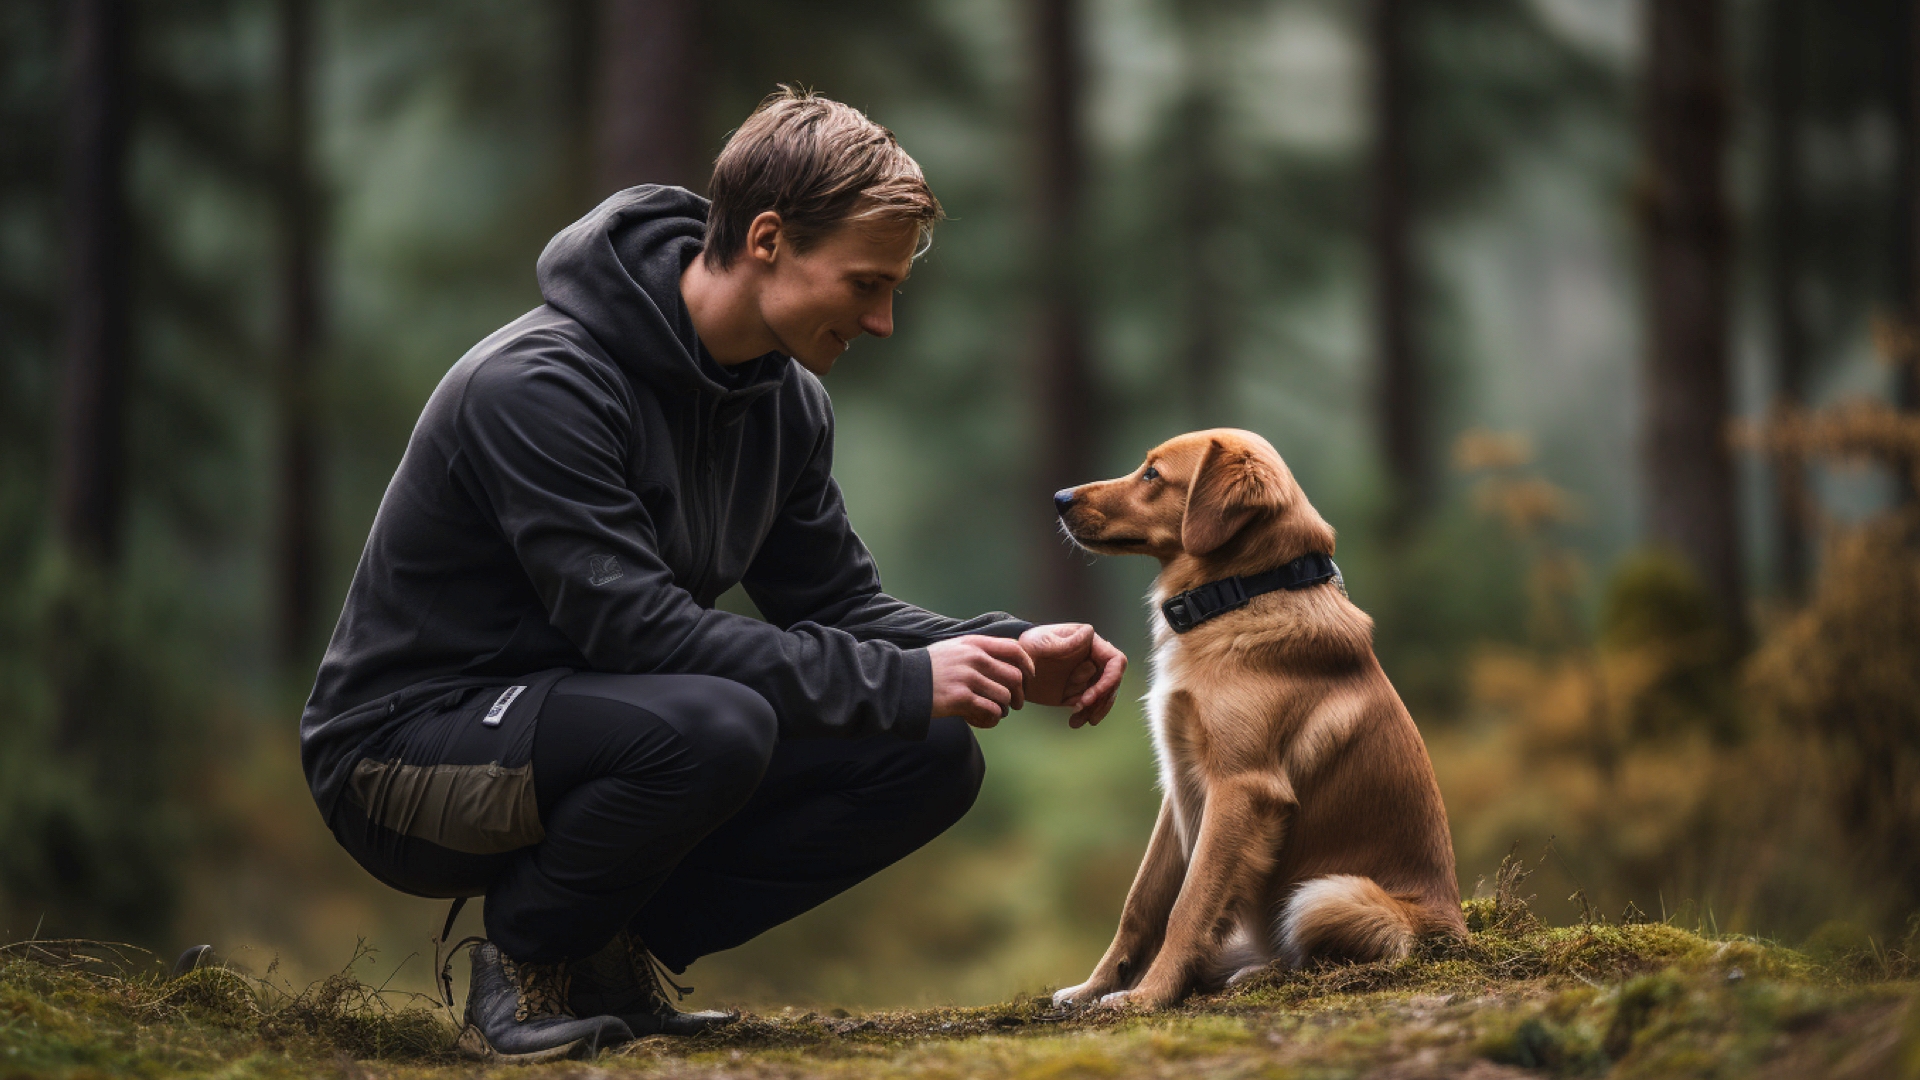 Addressing Common Training Challenges, Expert Advice for Portland Dog Owners